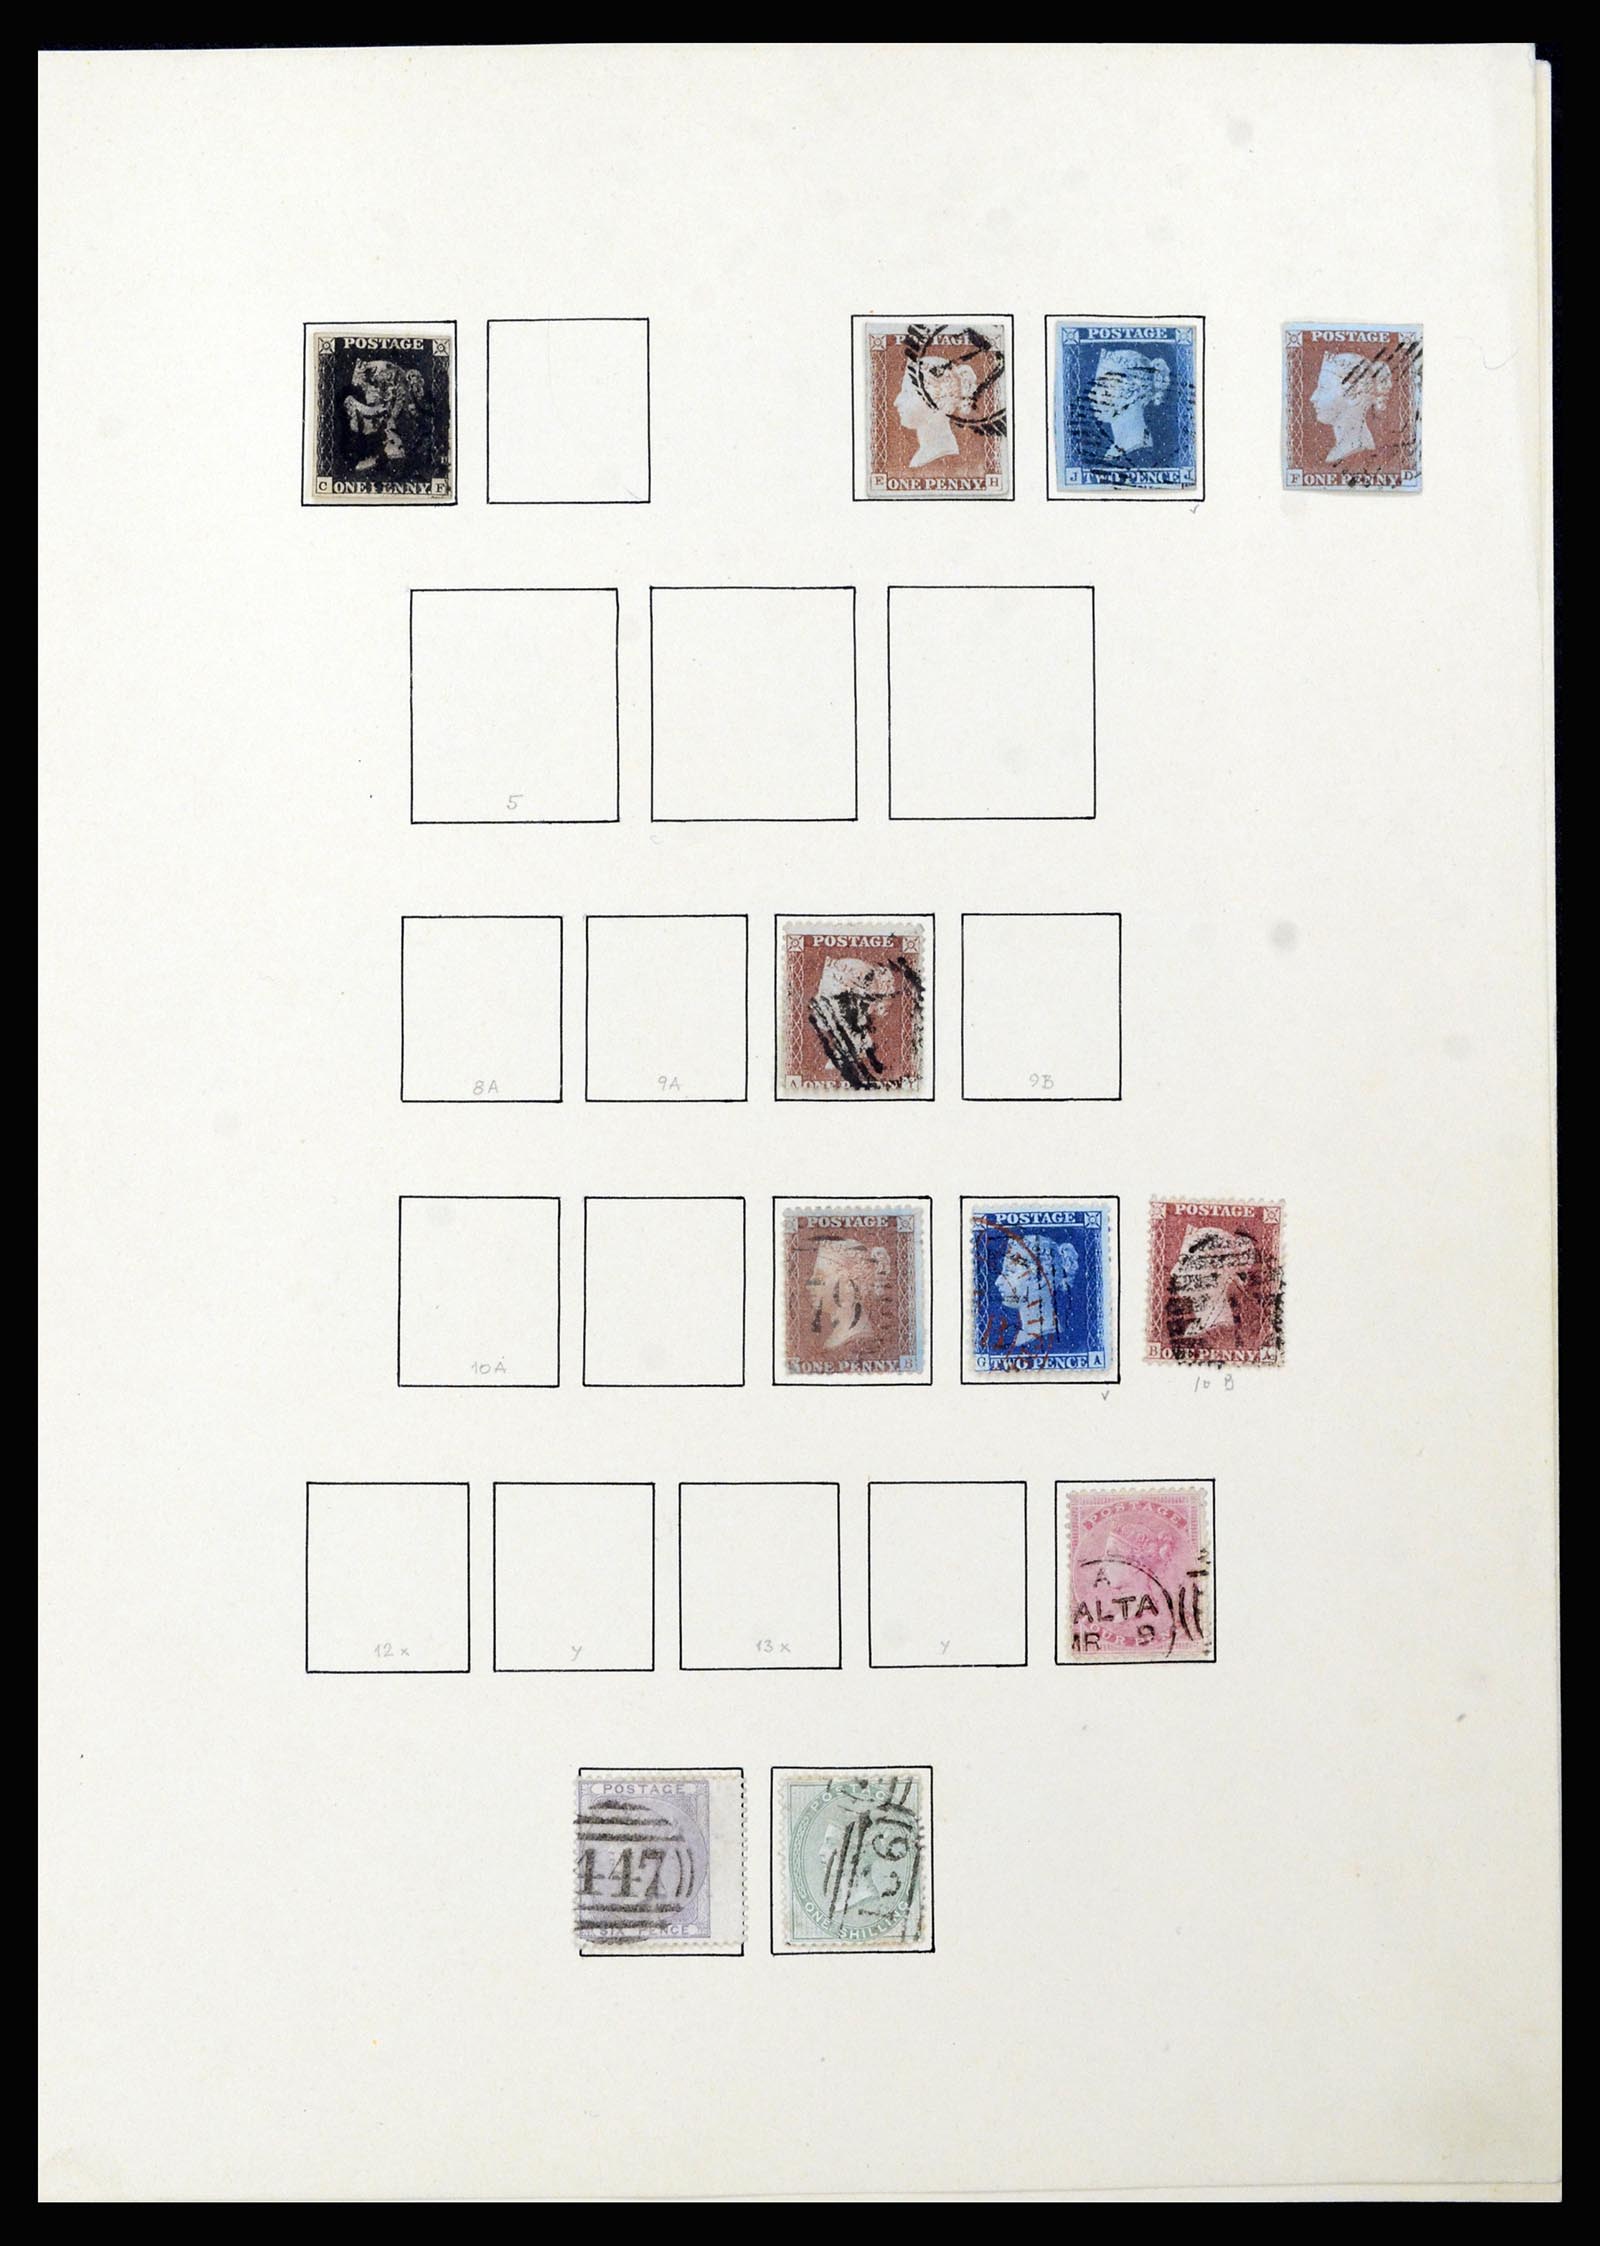 37169 001 - Stamp collection 37169 Great Britain 1840-1948.